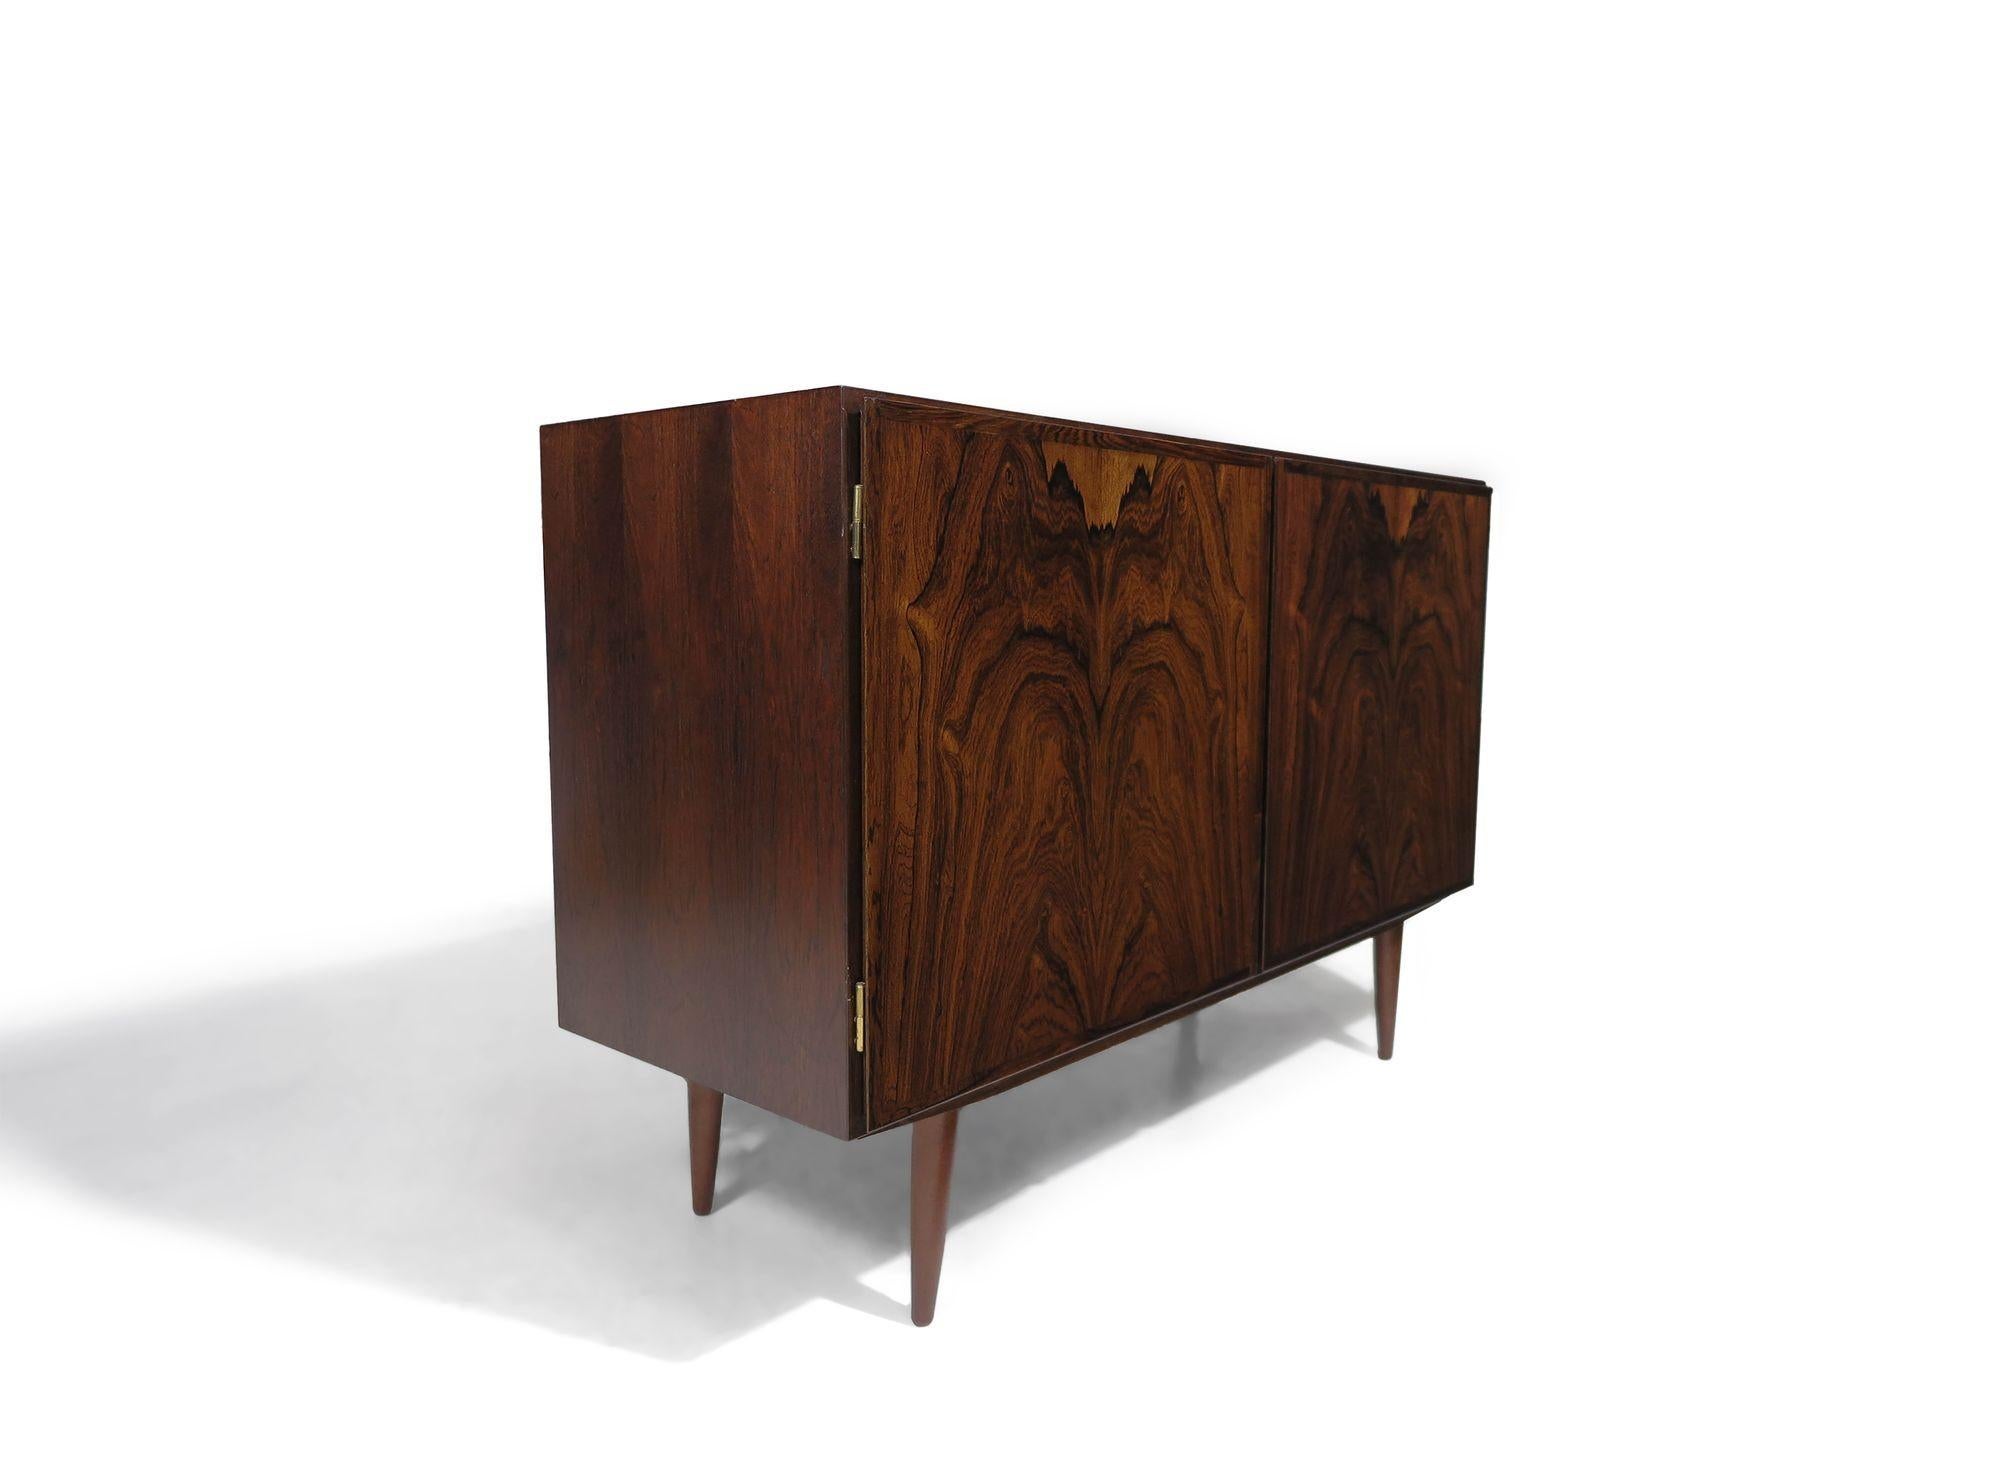 Brazilian rosewood cabinet designed by Omann Jun for Omann Jun Møbelfabrik, Denmark, 1964. This finely crafted cabinet features mitered corners and dynamic book-matched grain on the doors, and is raised on elegant tapered legs. The interior is